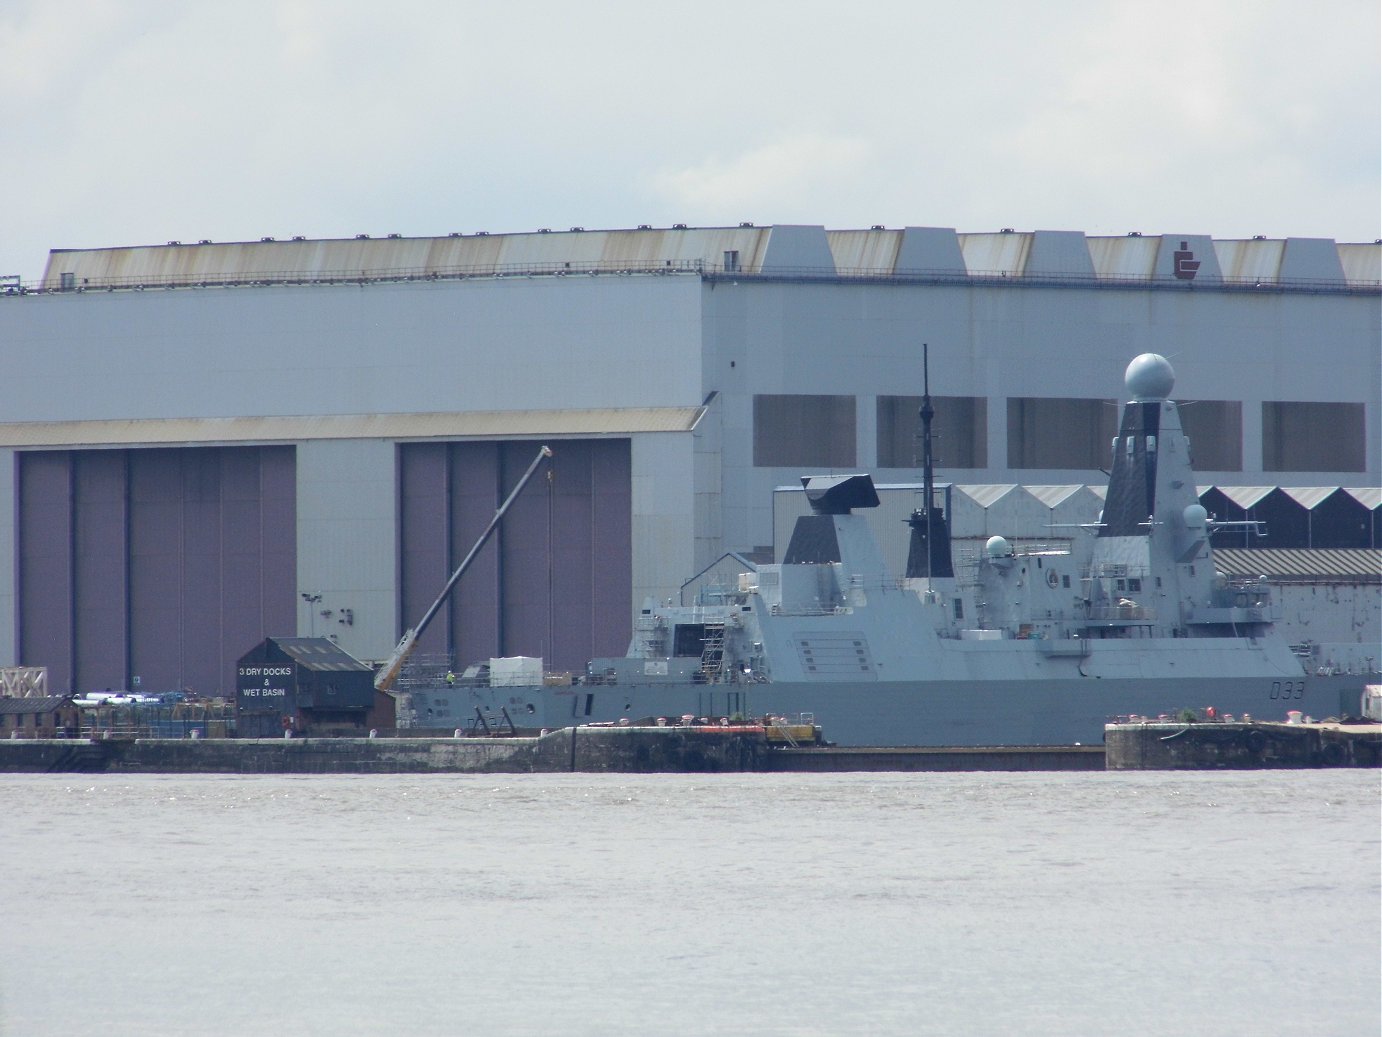 Type 45 destroyer H.M.S. Dauntless D33 at Cammell Laird, Liverpool 26 June 2021